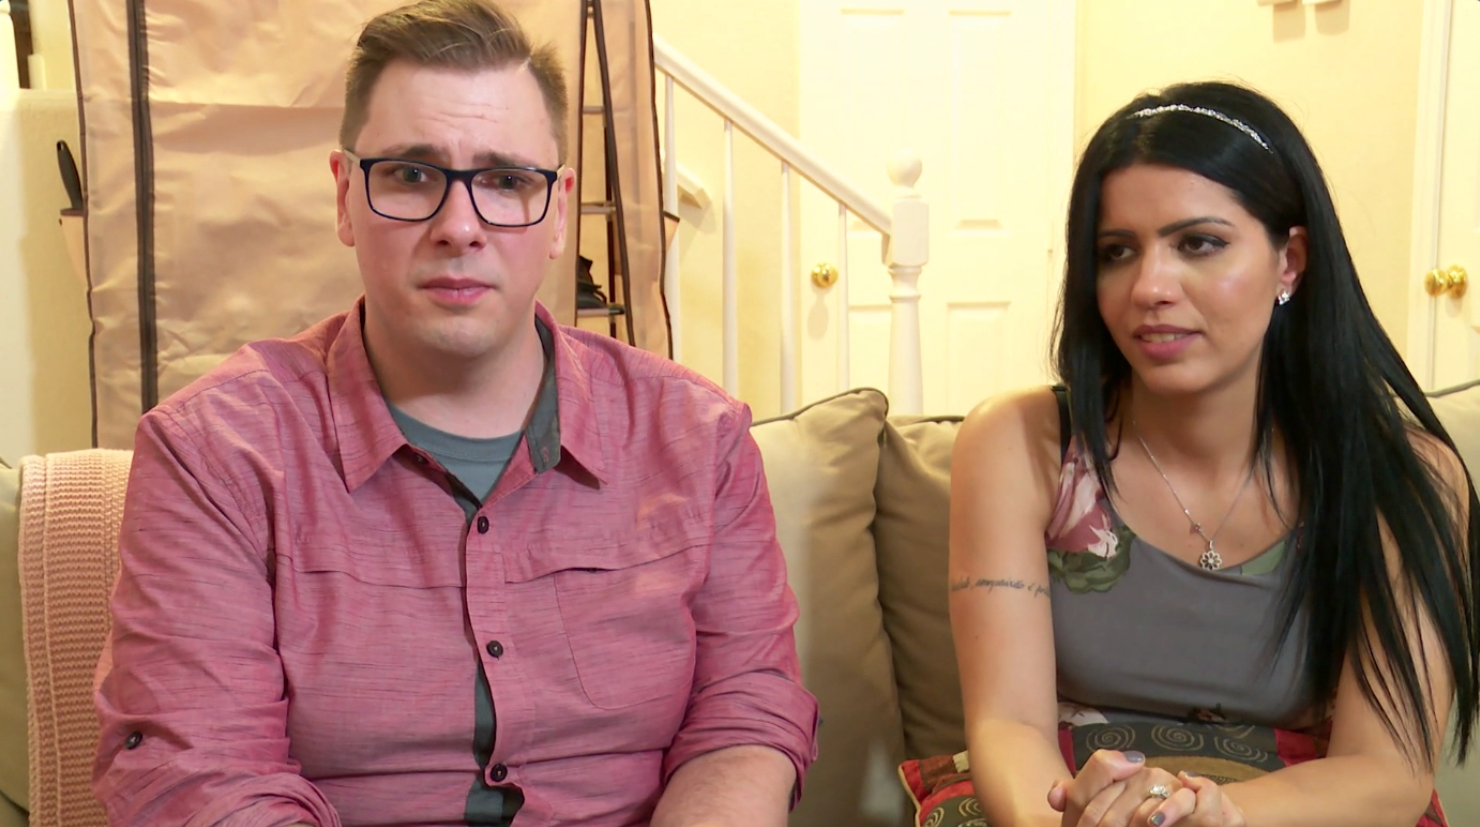 Real Life Has Ruined Watching “90 Day Fiancé” picture